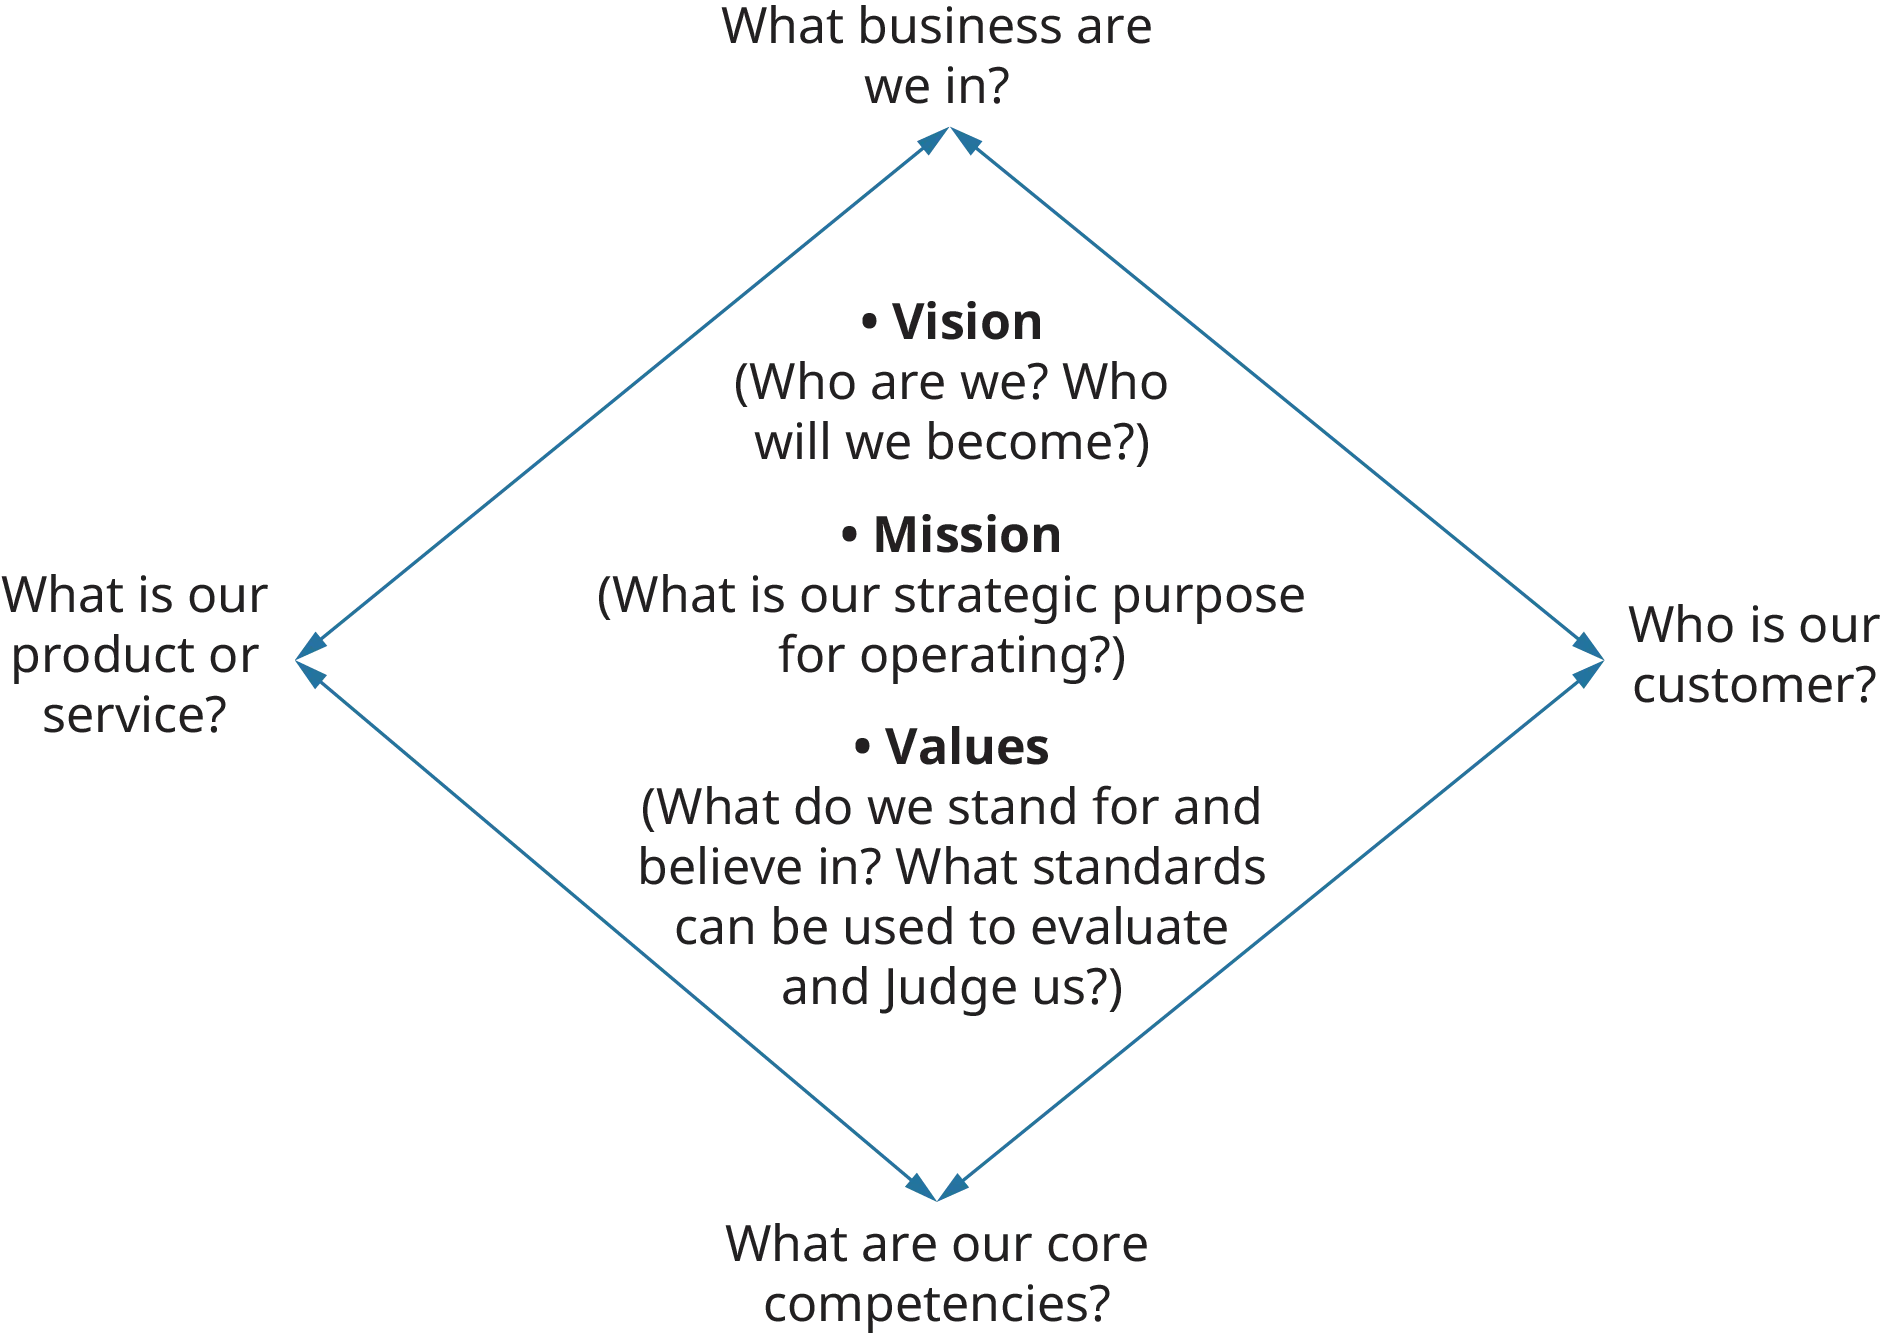 A diagram illustrates the role of the strategic and operational questions in the identification and implementation of vision, mission, and values.